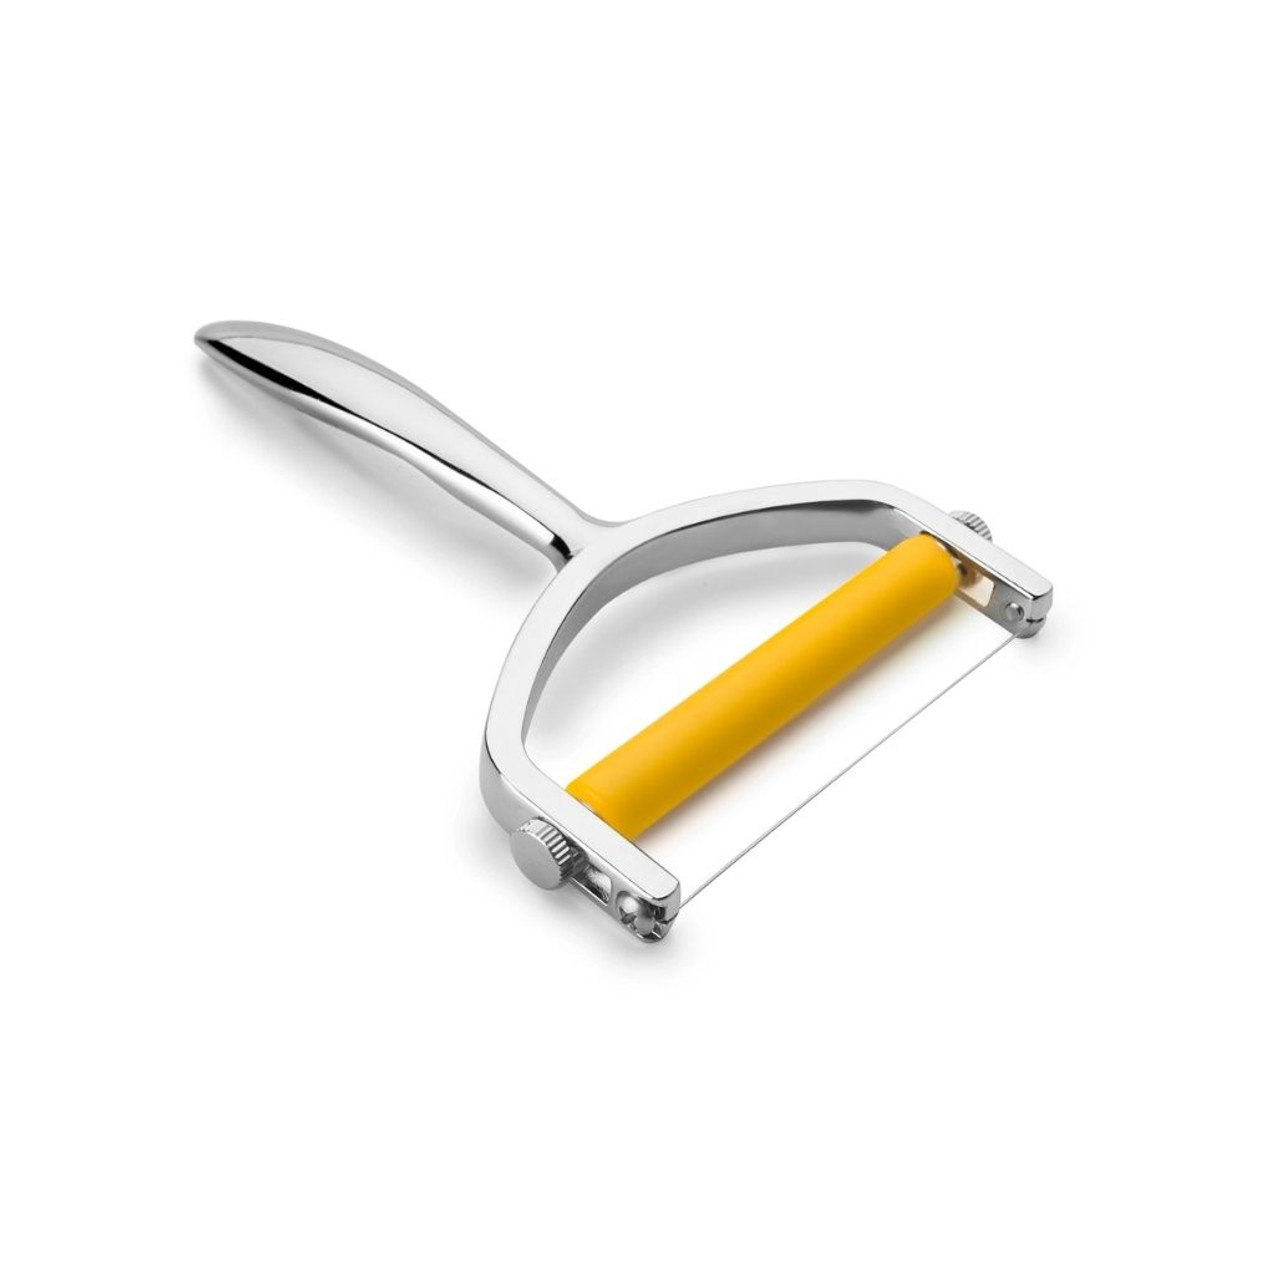 Durable Wire Cheese Slicer - Cheese Portioning by FoodTools